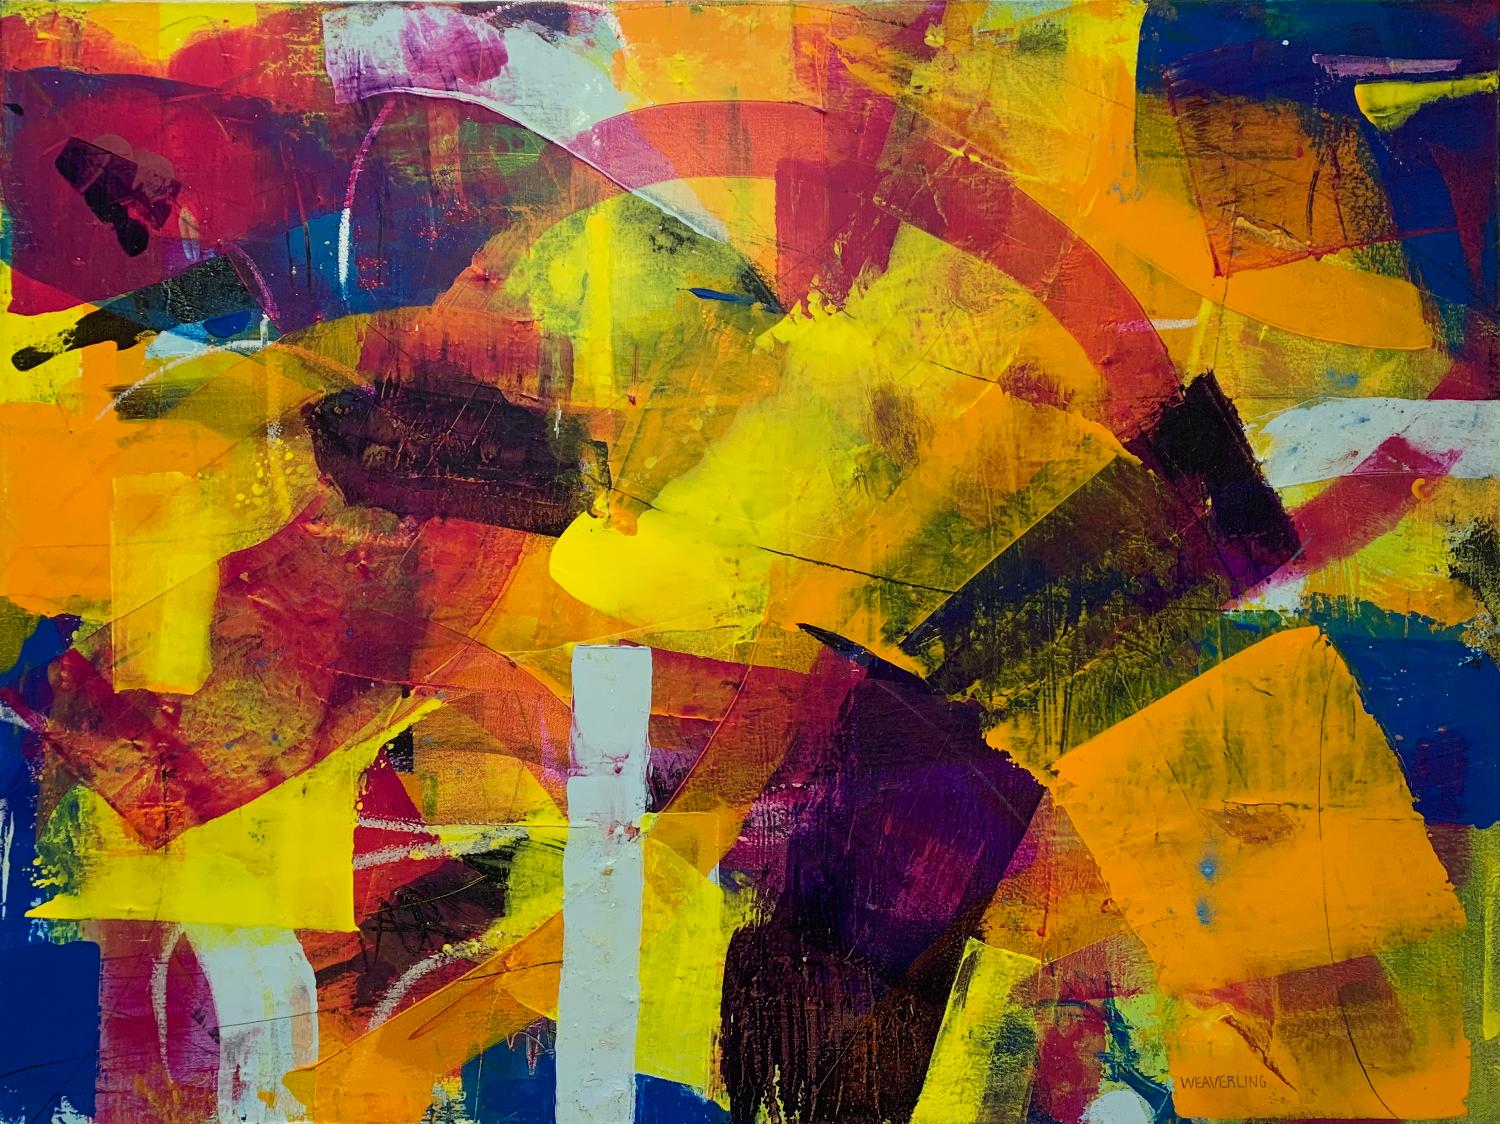 Inside the Rainbow, Abstract Painting - Mixed Media Art by Julie Weaverling